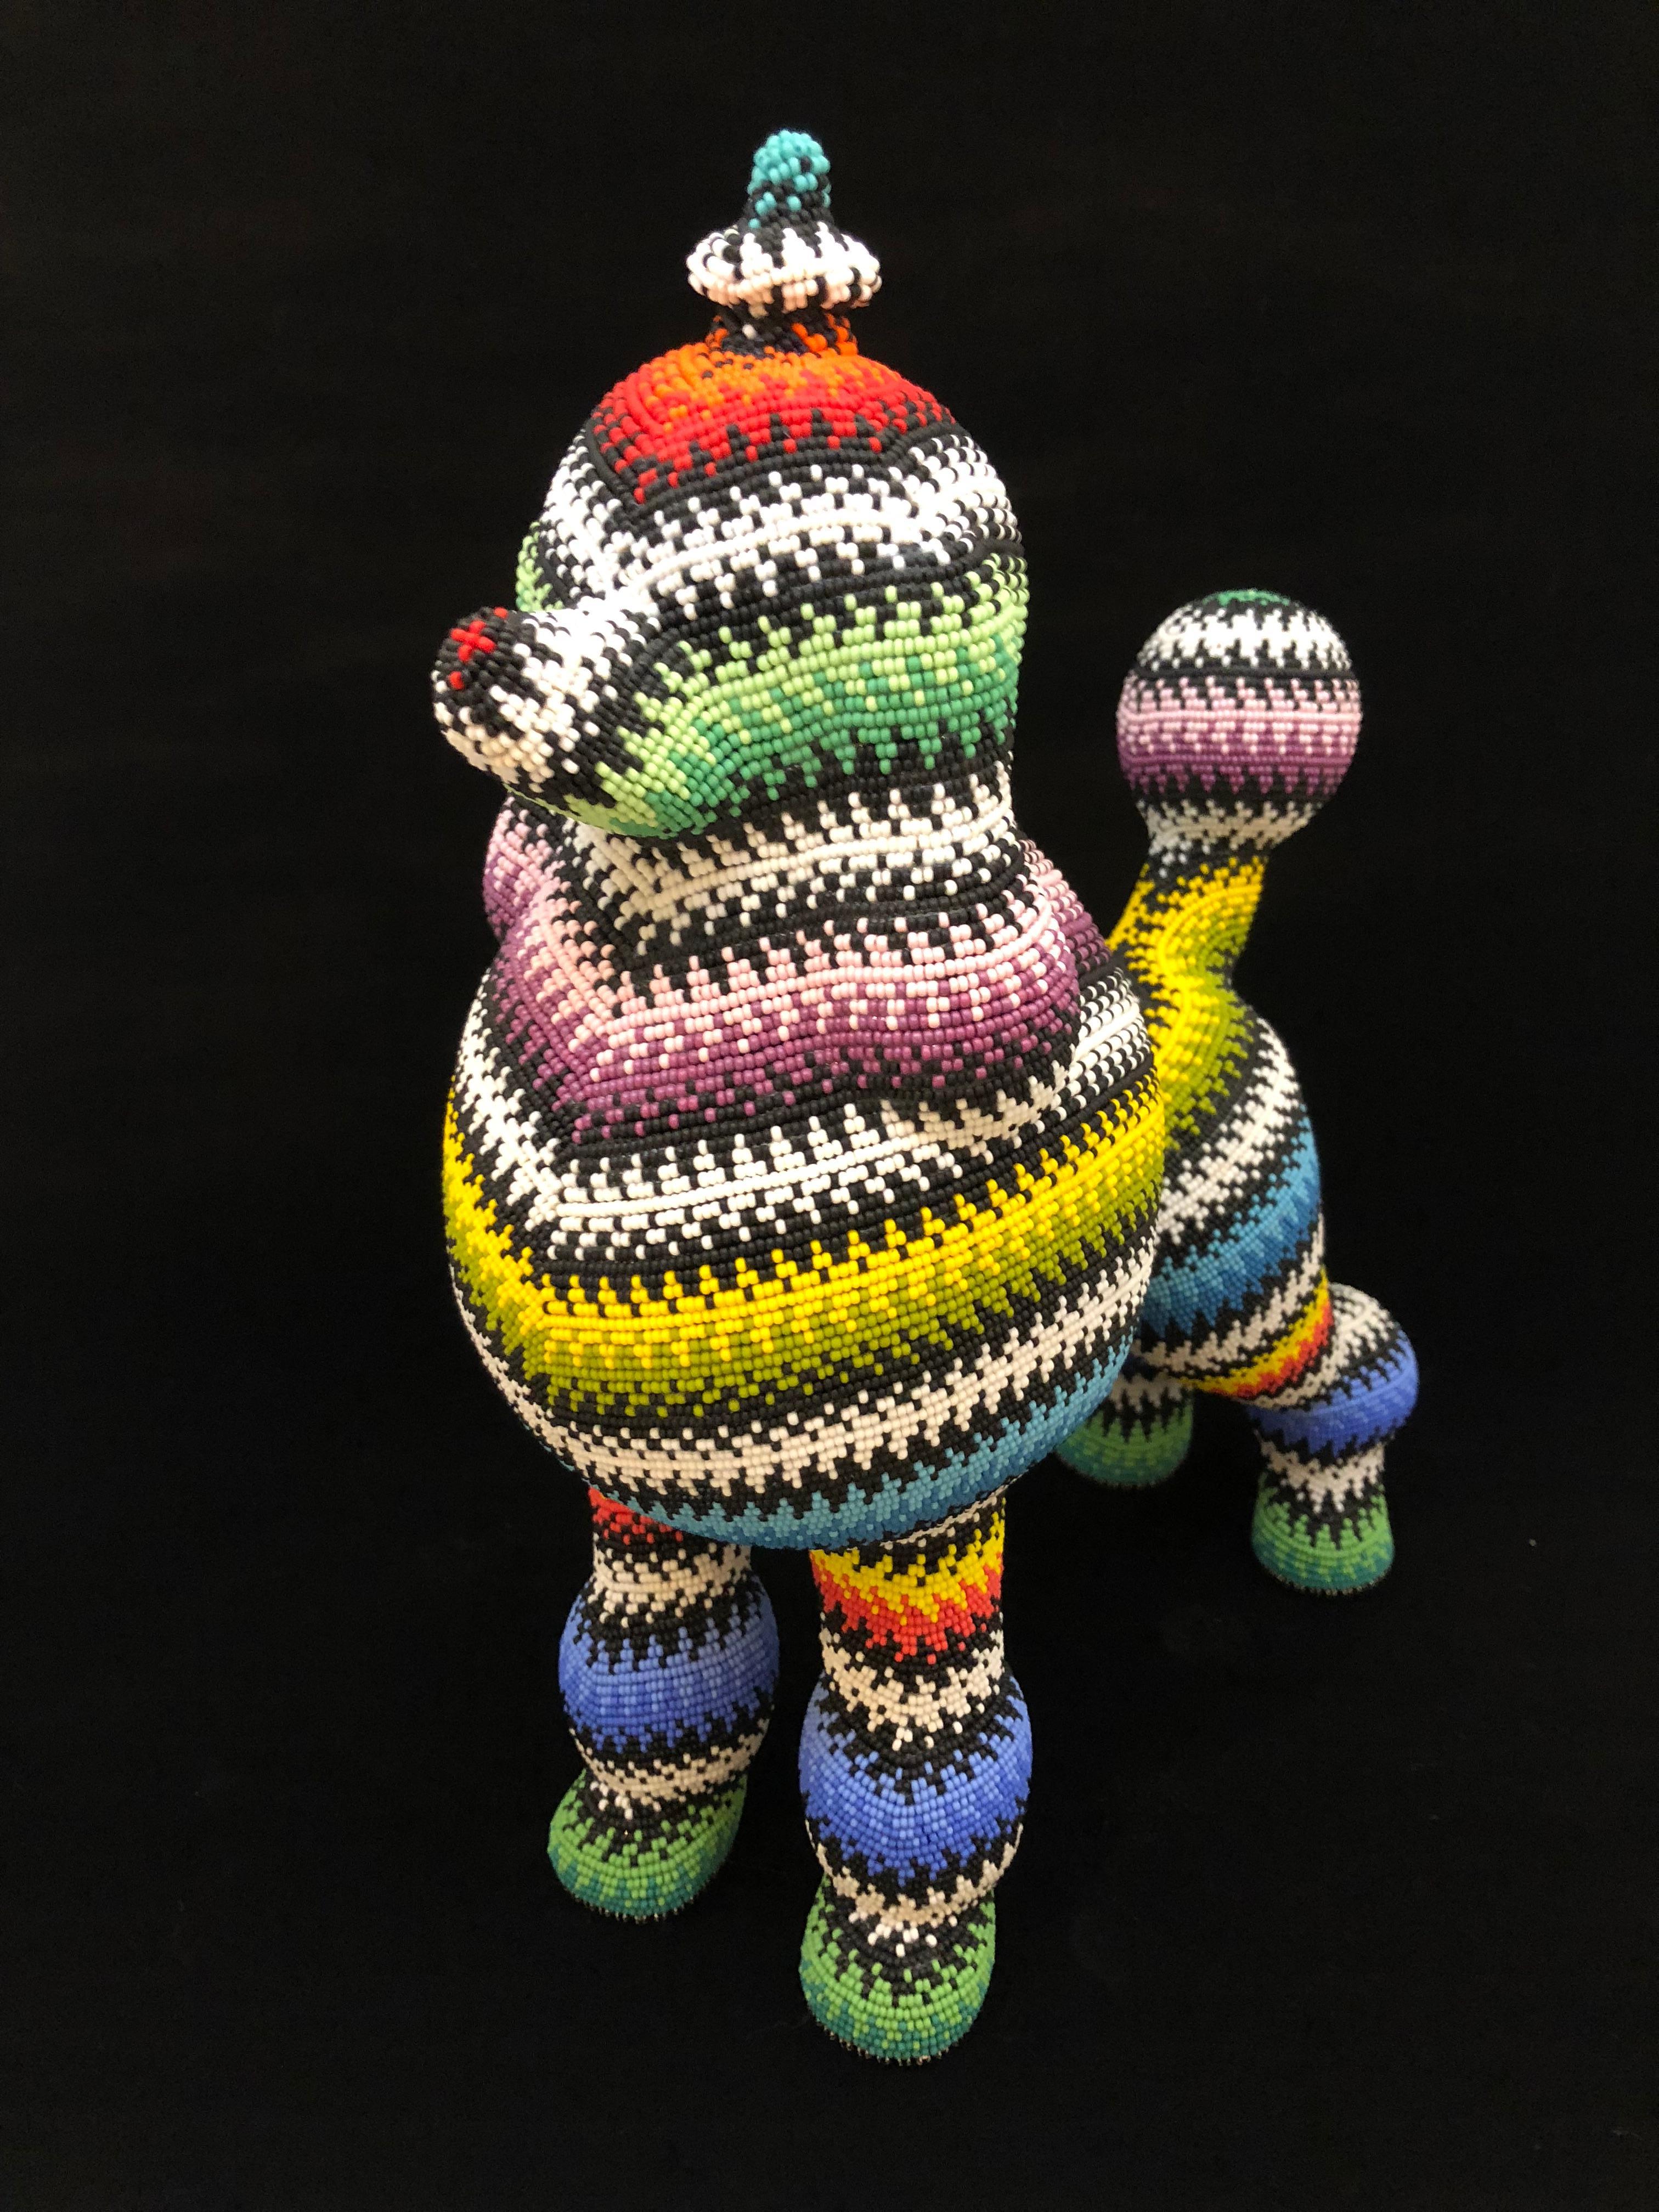 Poodle Form Covered in Glass Czech Seed Beads - Mixed Media Art by Jan Huling